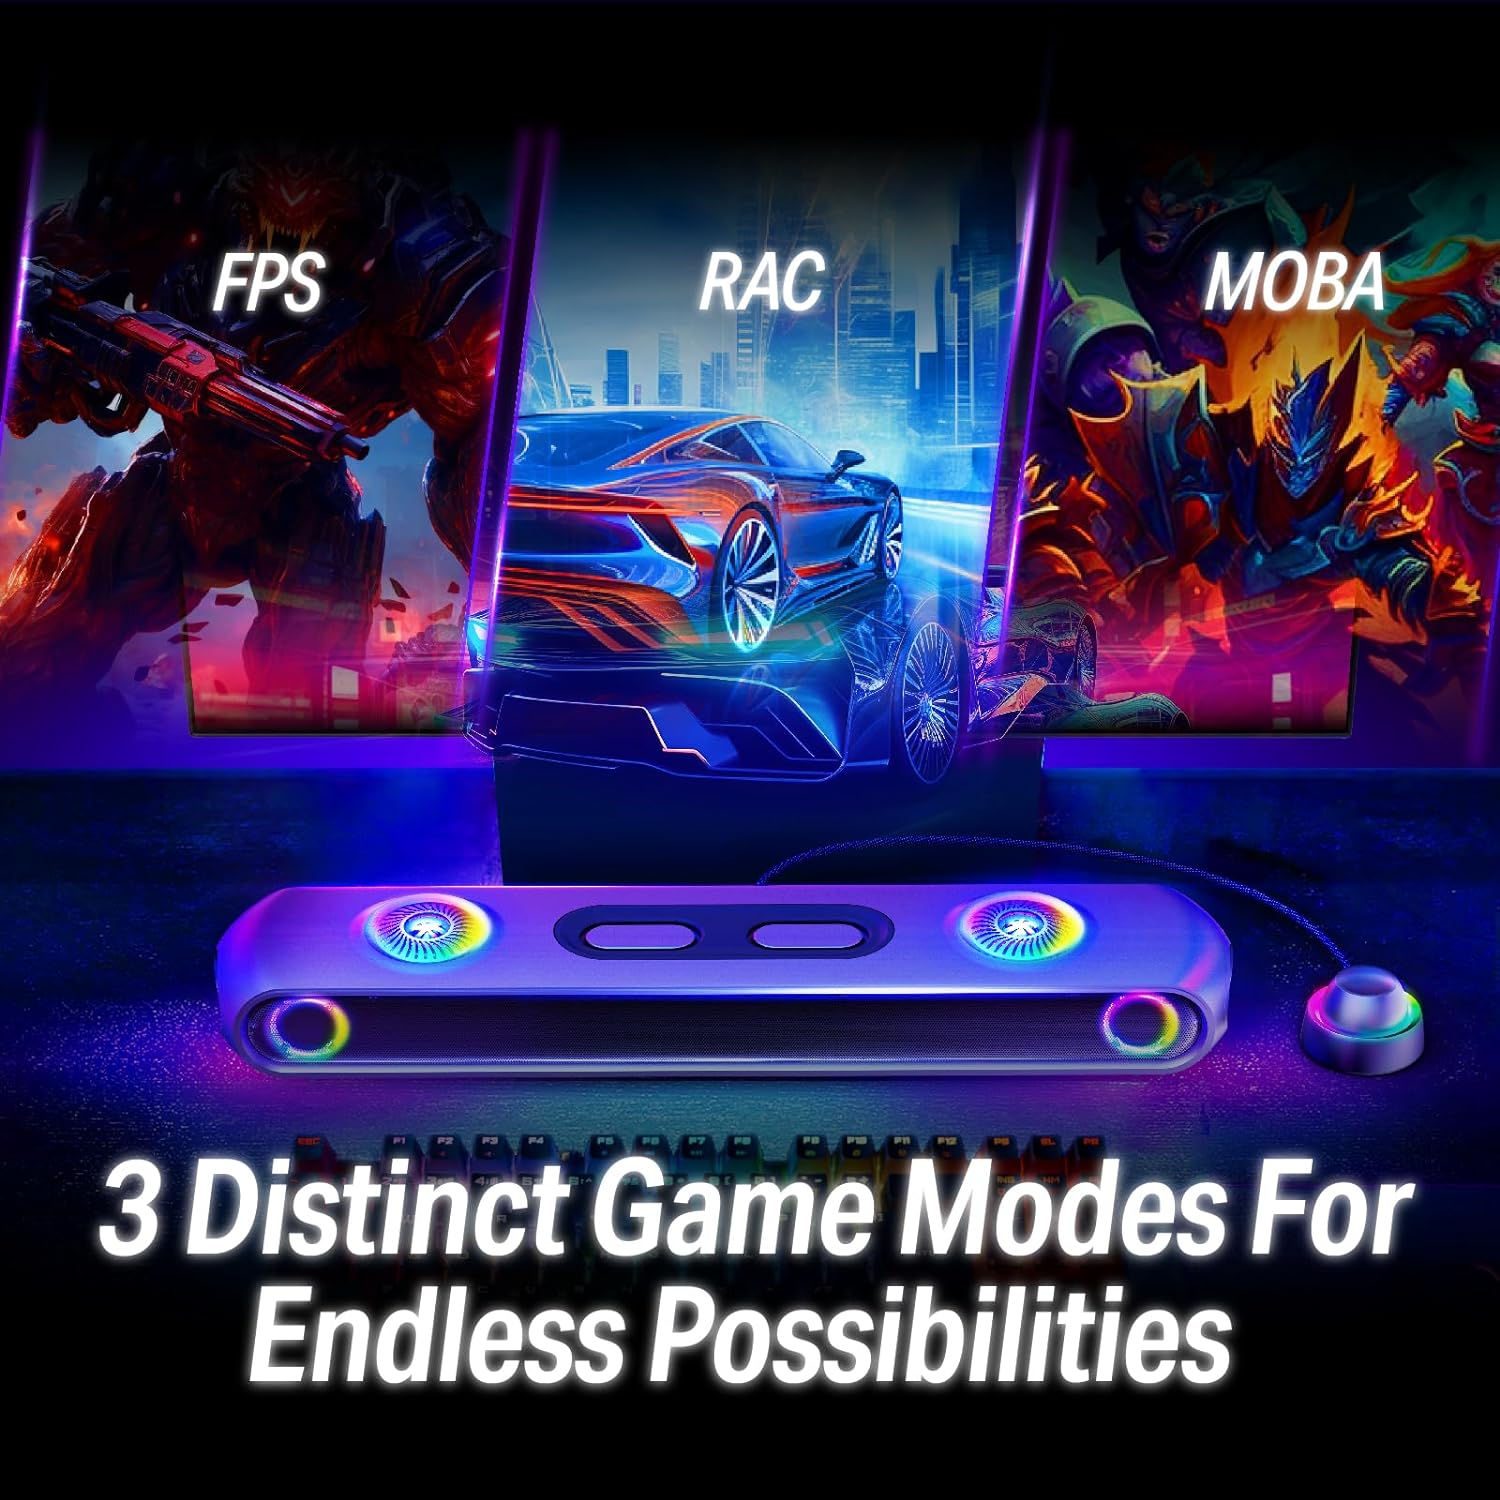 OXS Thunder Pro Gaming Soundbar with 3 Distinct Game Modes  FPS  RAC  and MOBA for Endless Possibilities